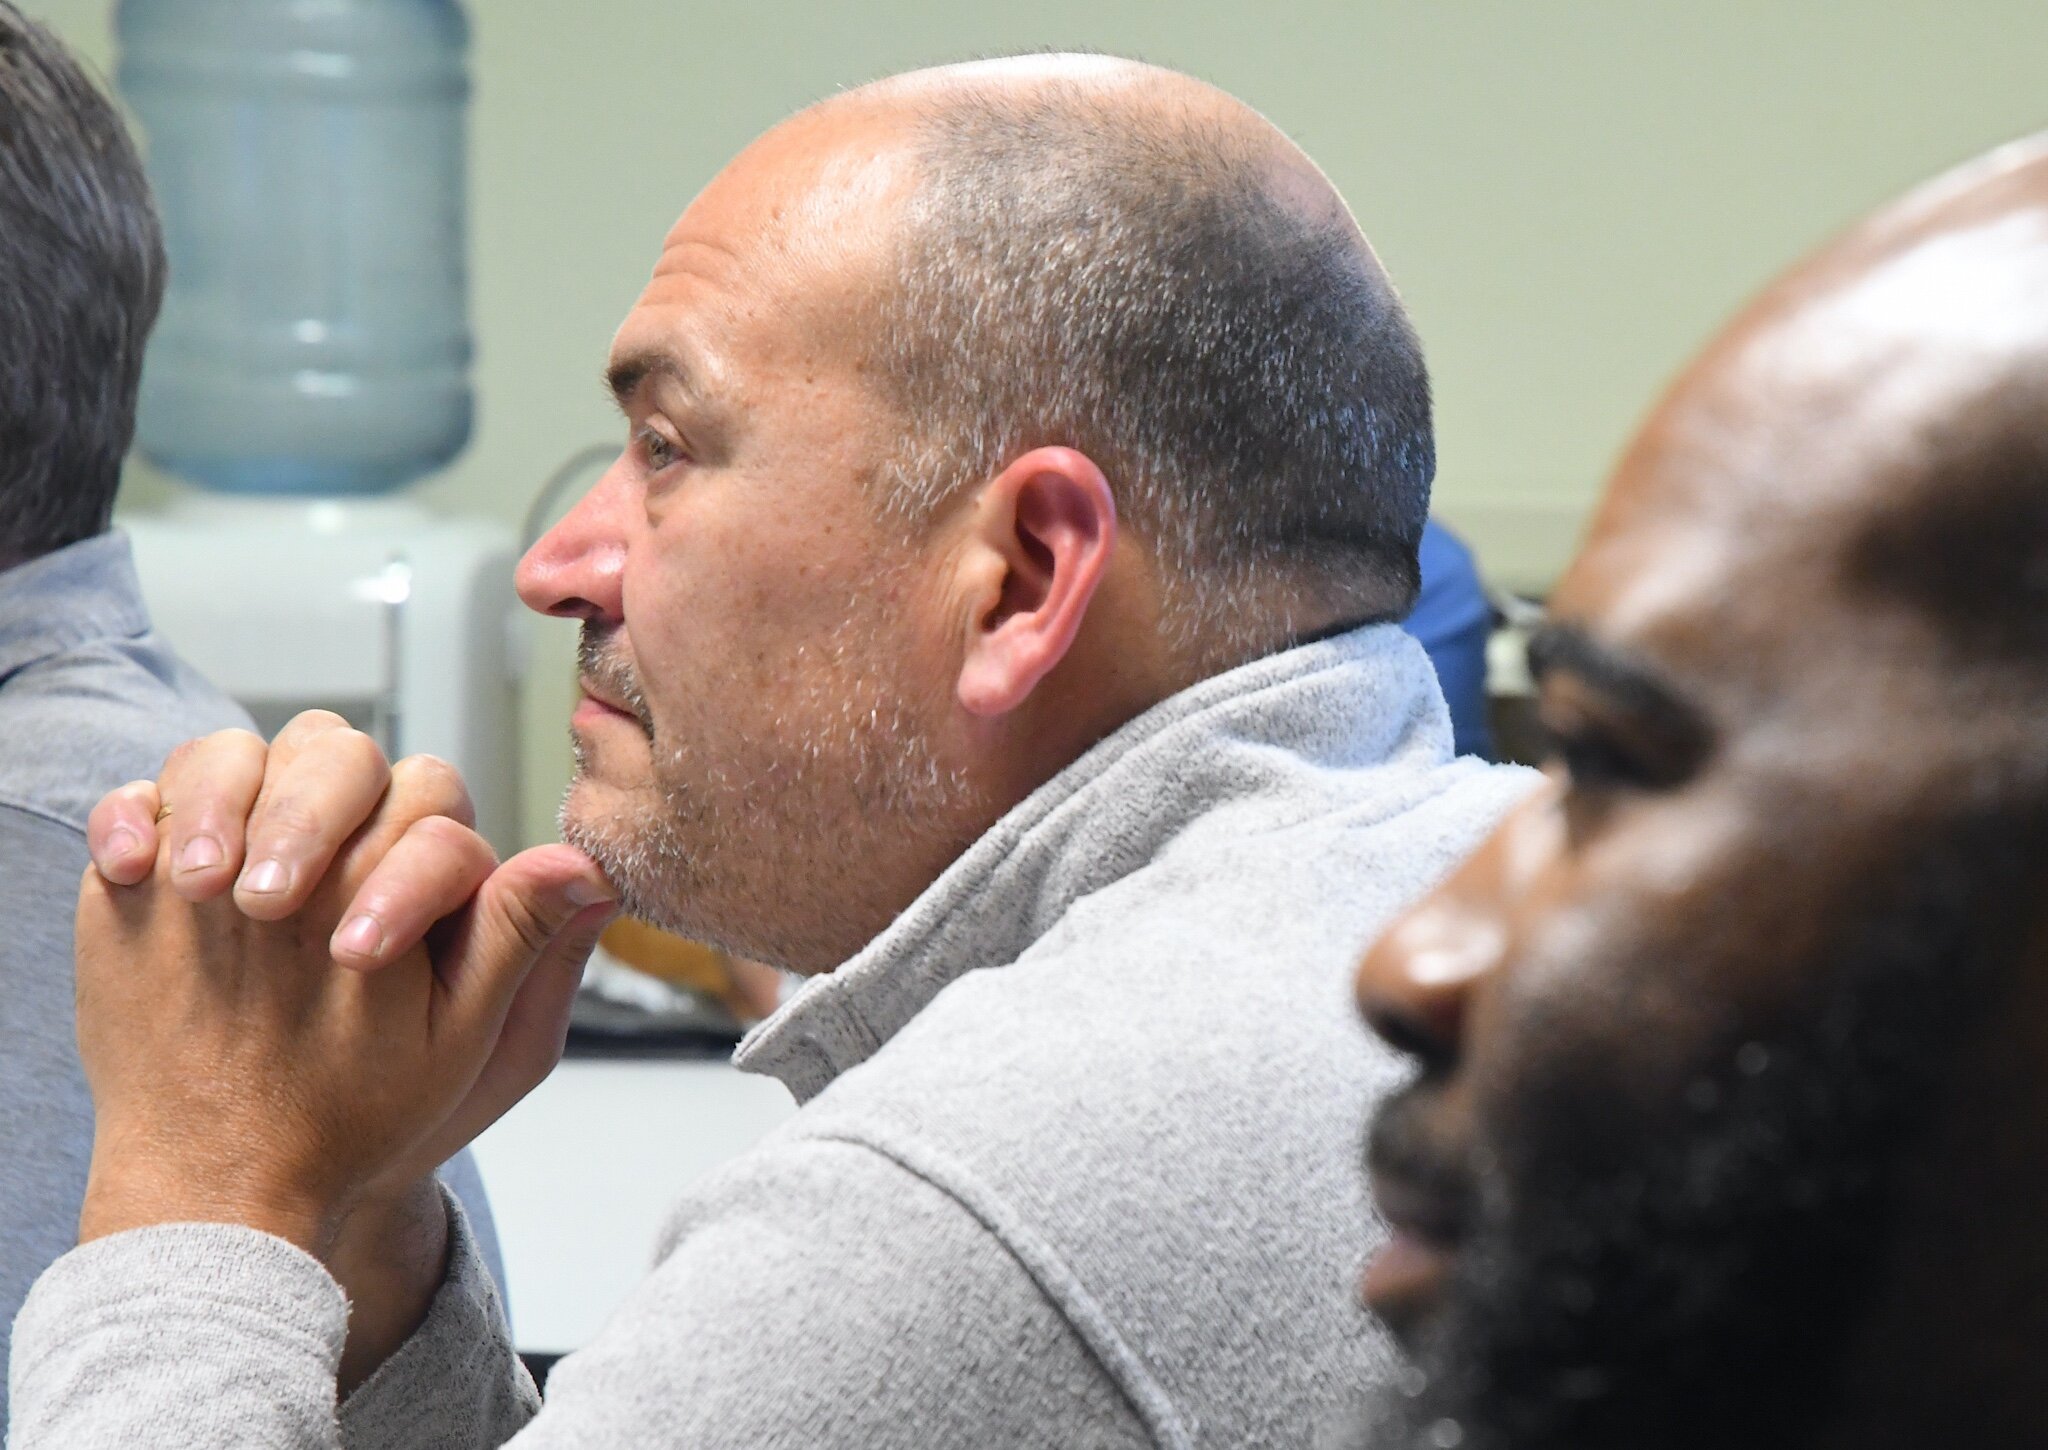 Dave Owens, left, a Marine Corps veteran from Delton, and Sean Stallwork, an Air Force veteran from Battle Creek, listen to presenters during the opening session of the Michigan Veteran Entrepreneur Lab session in Battle Creek.